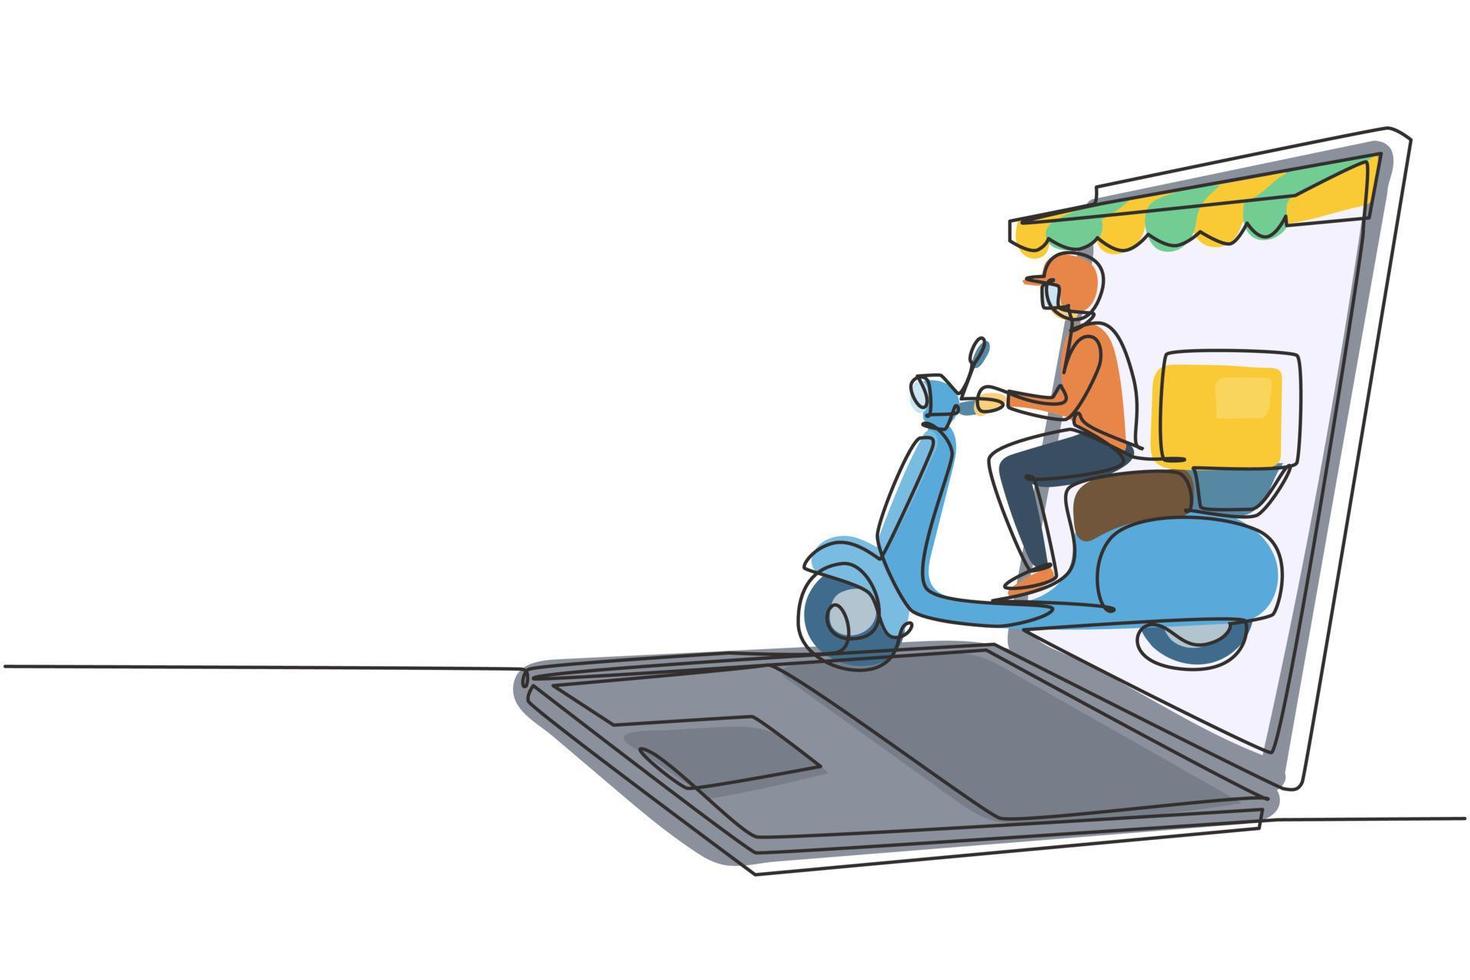 Single continuous line drawing courier riding scooter carrying package box out of giant laptop screen with canopy. Online delivery service. Dynamic one line draw graphic design vector illustration